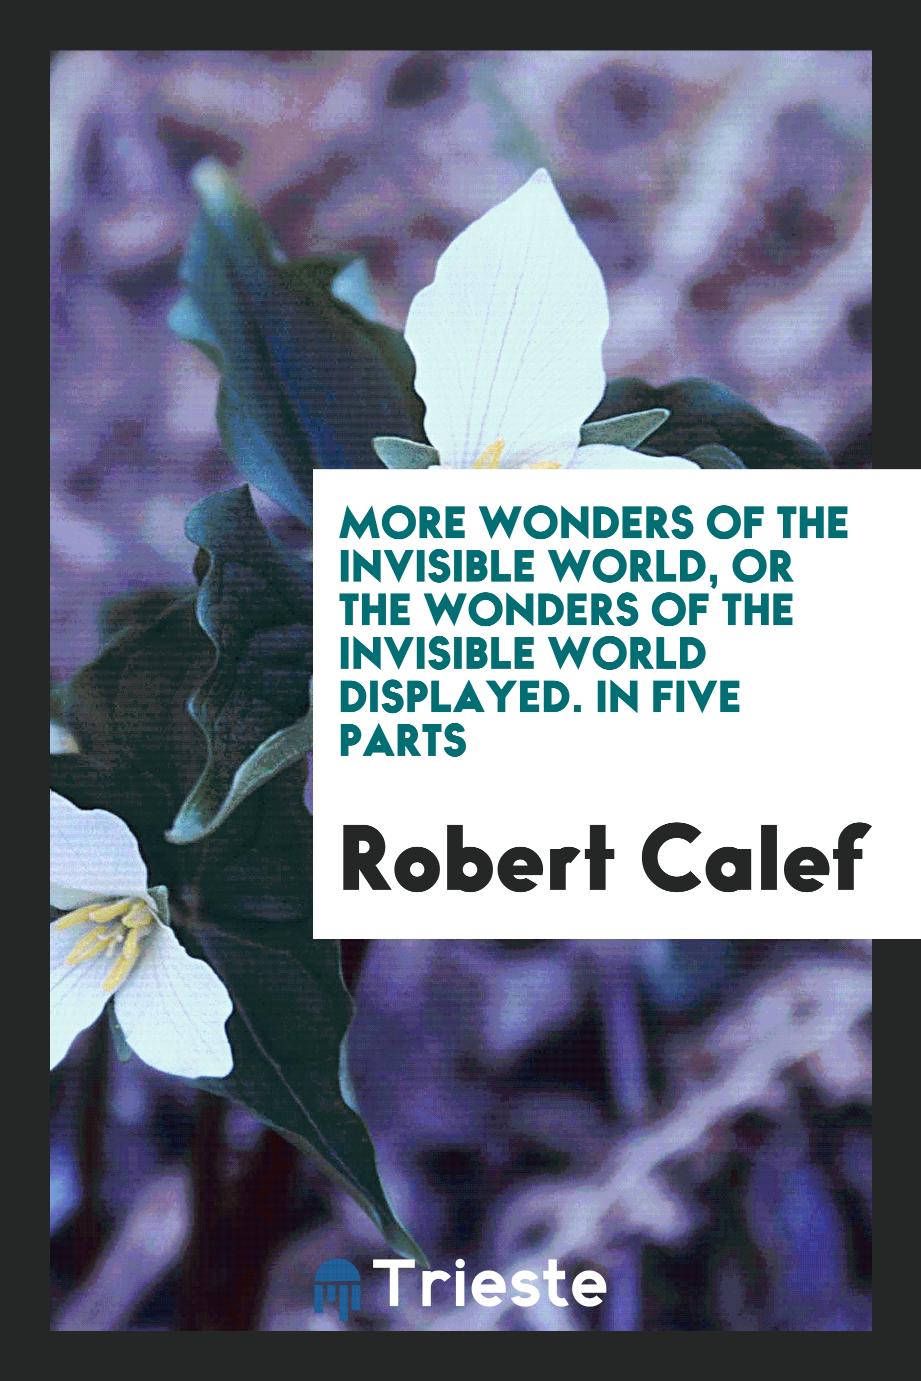 More Wonders of the Invisible World, or the Wonders of the Invisible World Displayed. In Five Parts